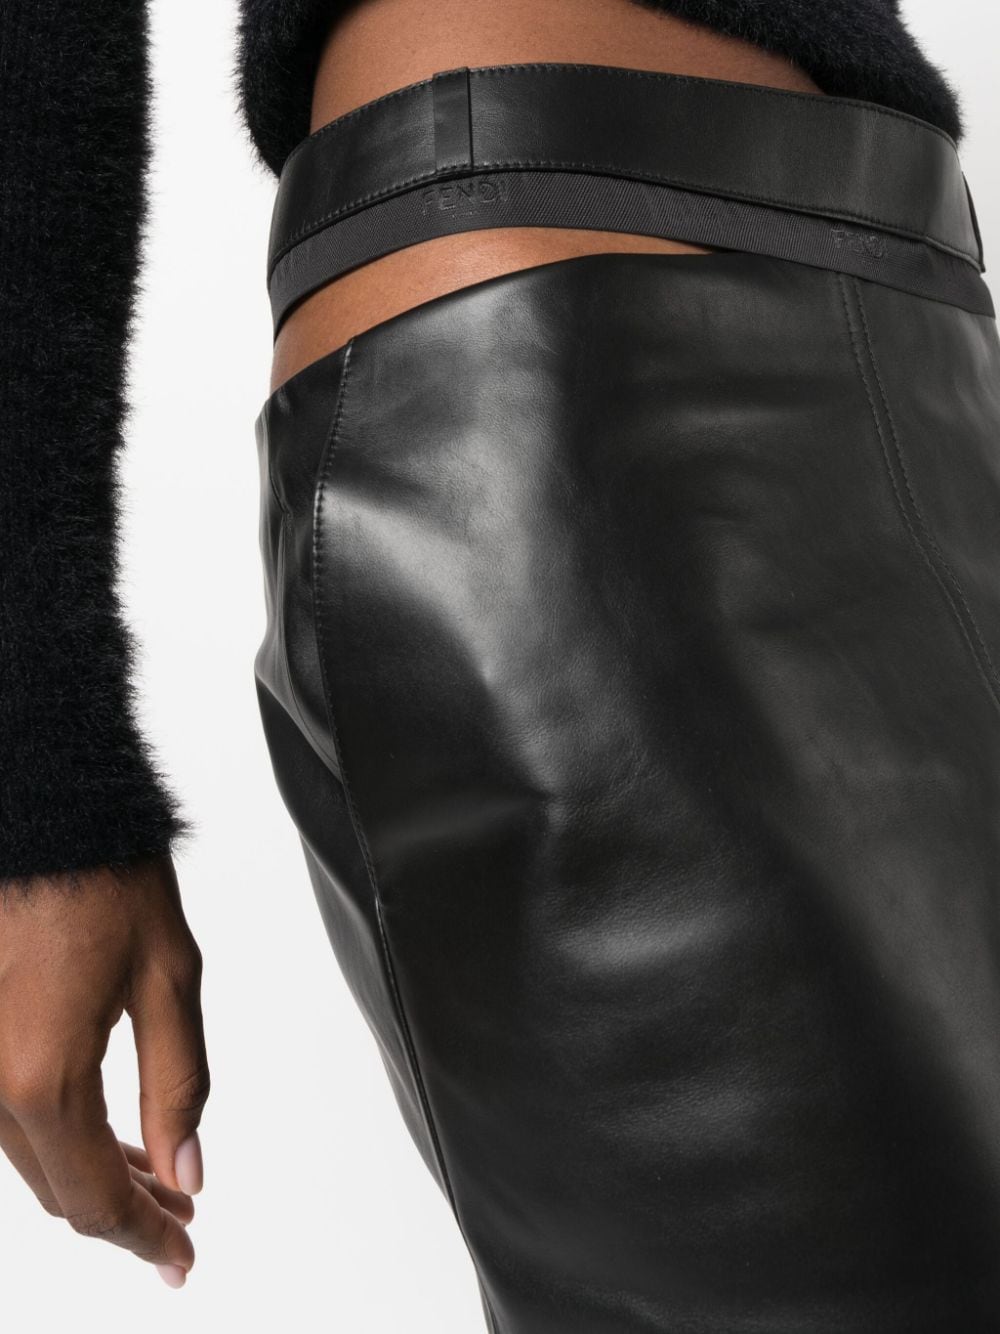 FENDI Black Leather Skirt for Women - Fall/Winter 2024 Collection